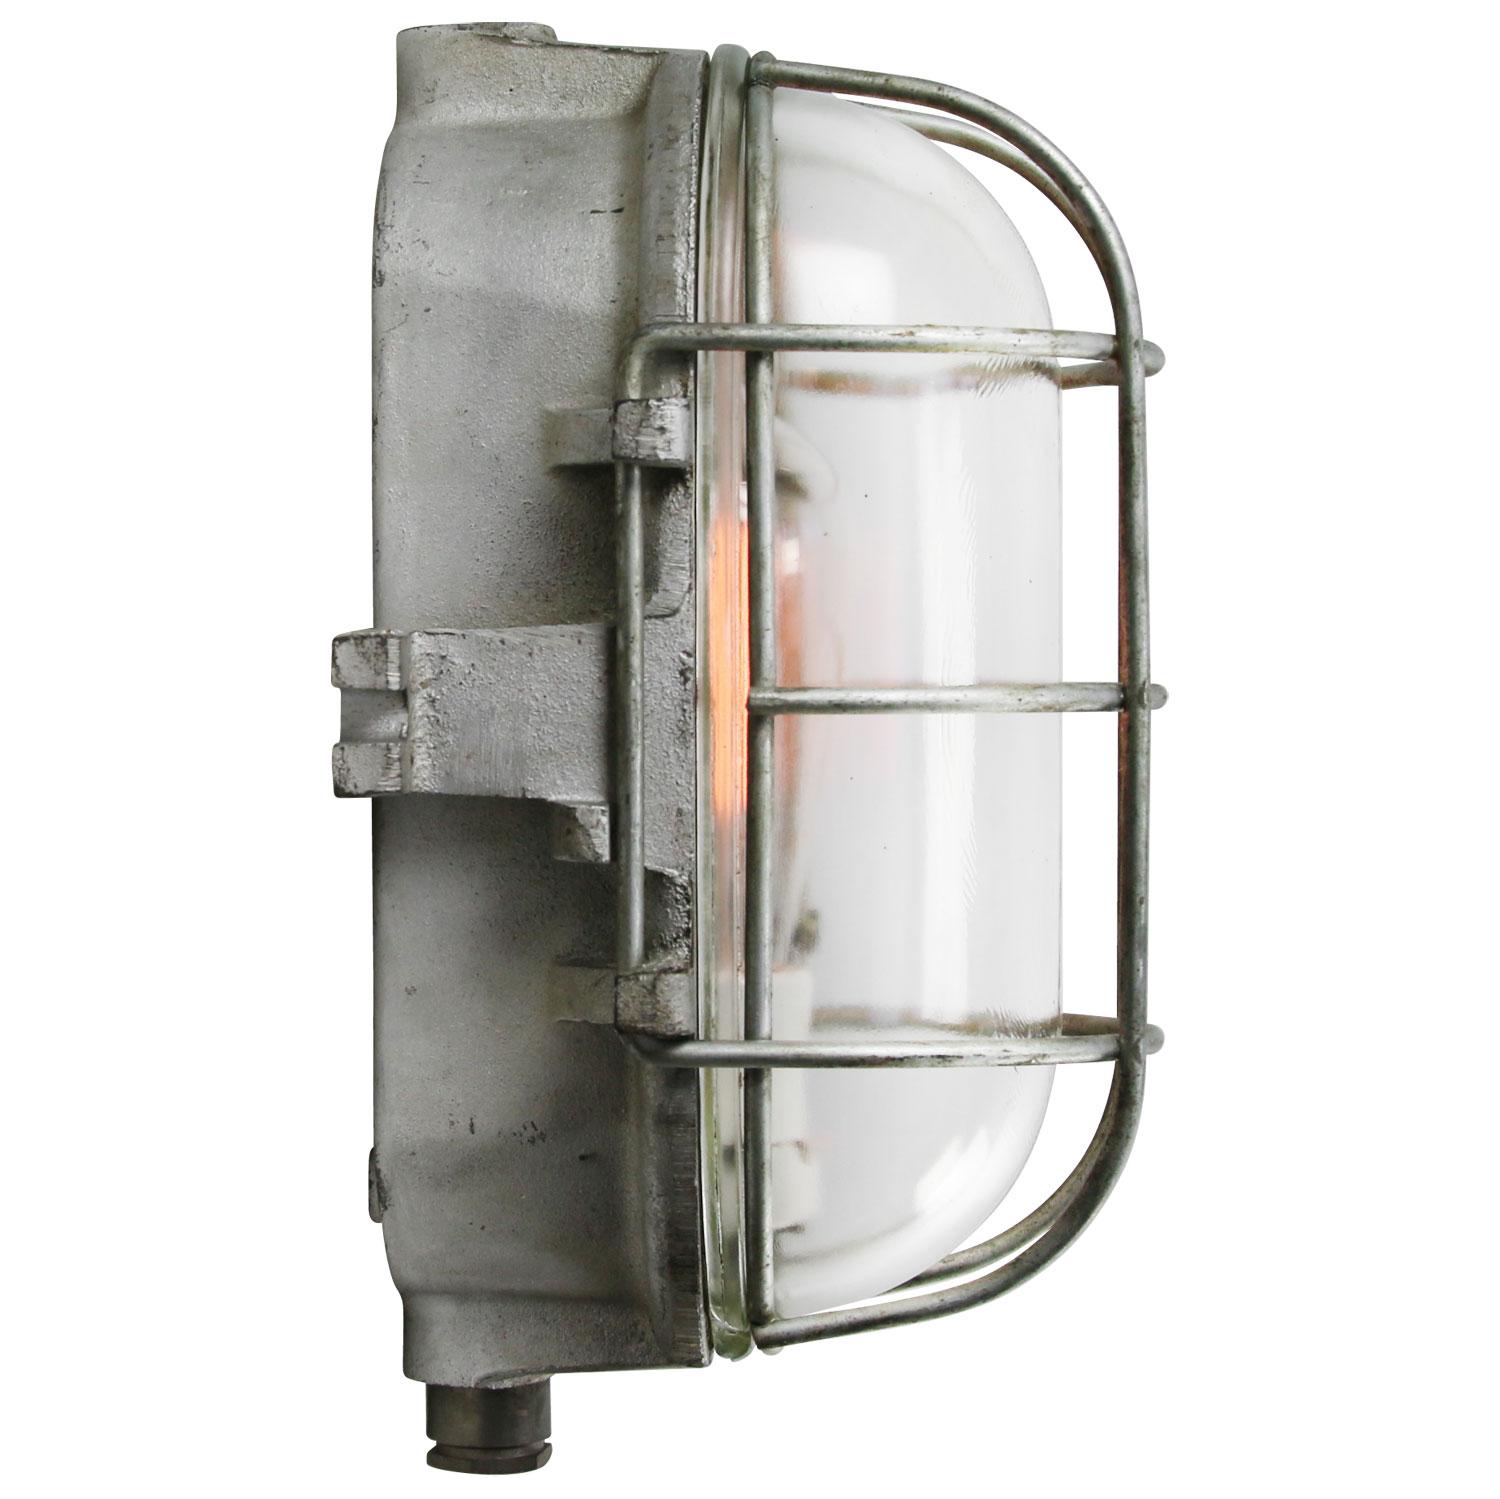 Industrial wall ceiling scone
cast iron clear glass

Weight: 3.60 kg / 7.9 lb

Priced per individual item. All lamps have been made suitable by international standards for incandescent light bulbs, energy-efficient and LED bulbs. E26/E27 bulb